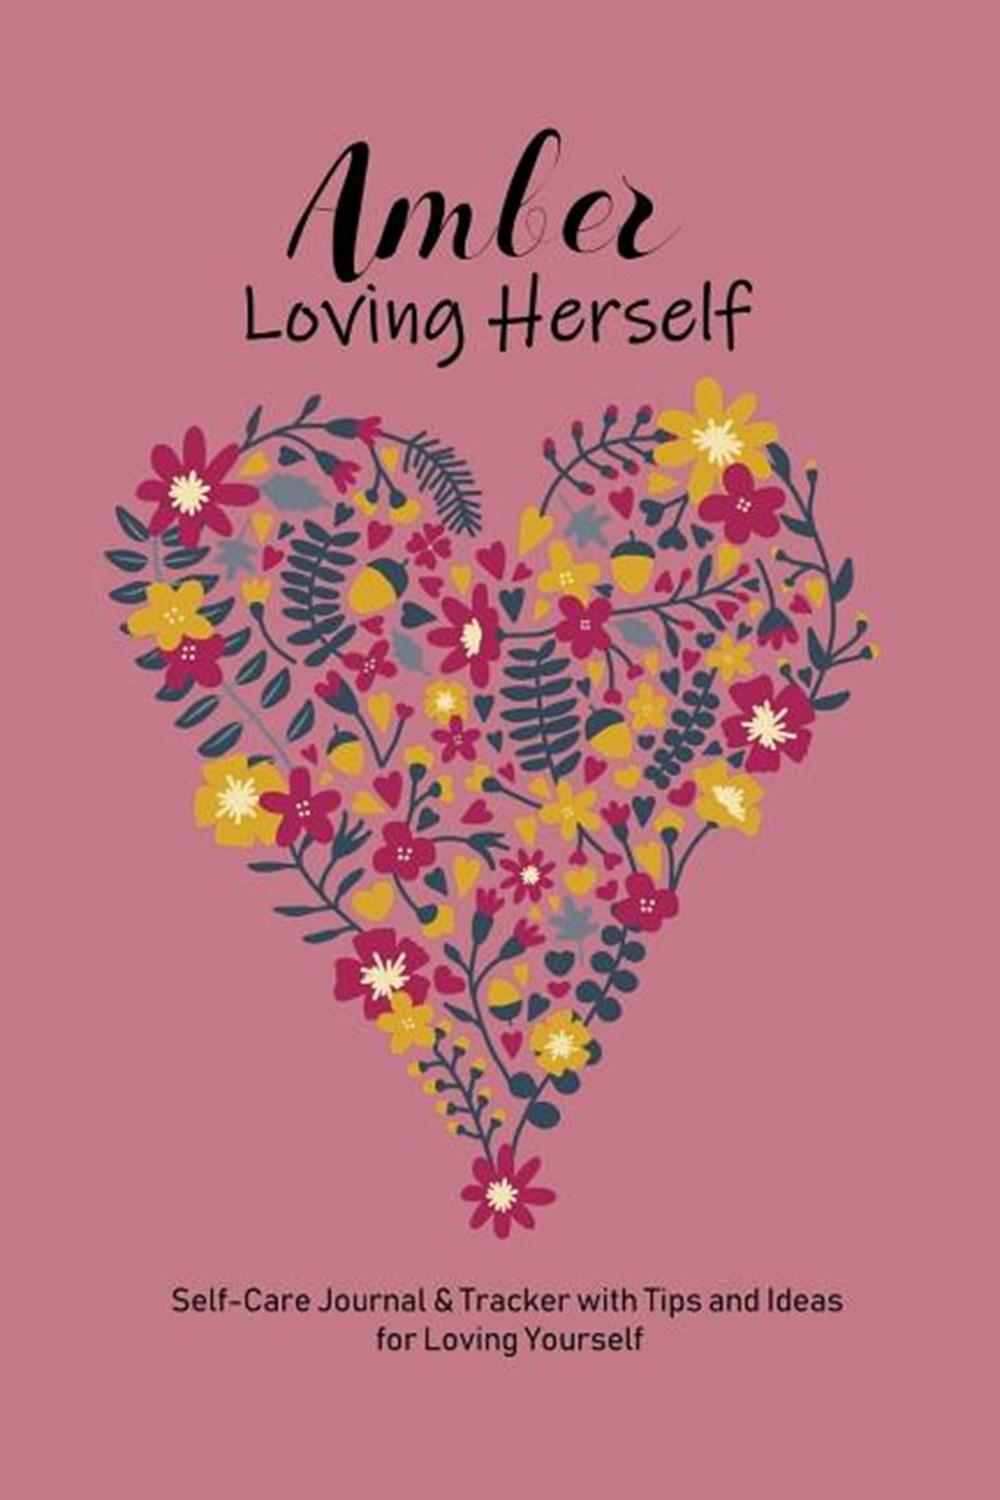 Amber Loving Herself Personalized Self-Care Journal & Tracker with Tips and Ideas for Loving Yoursel